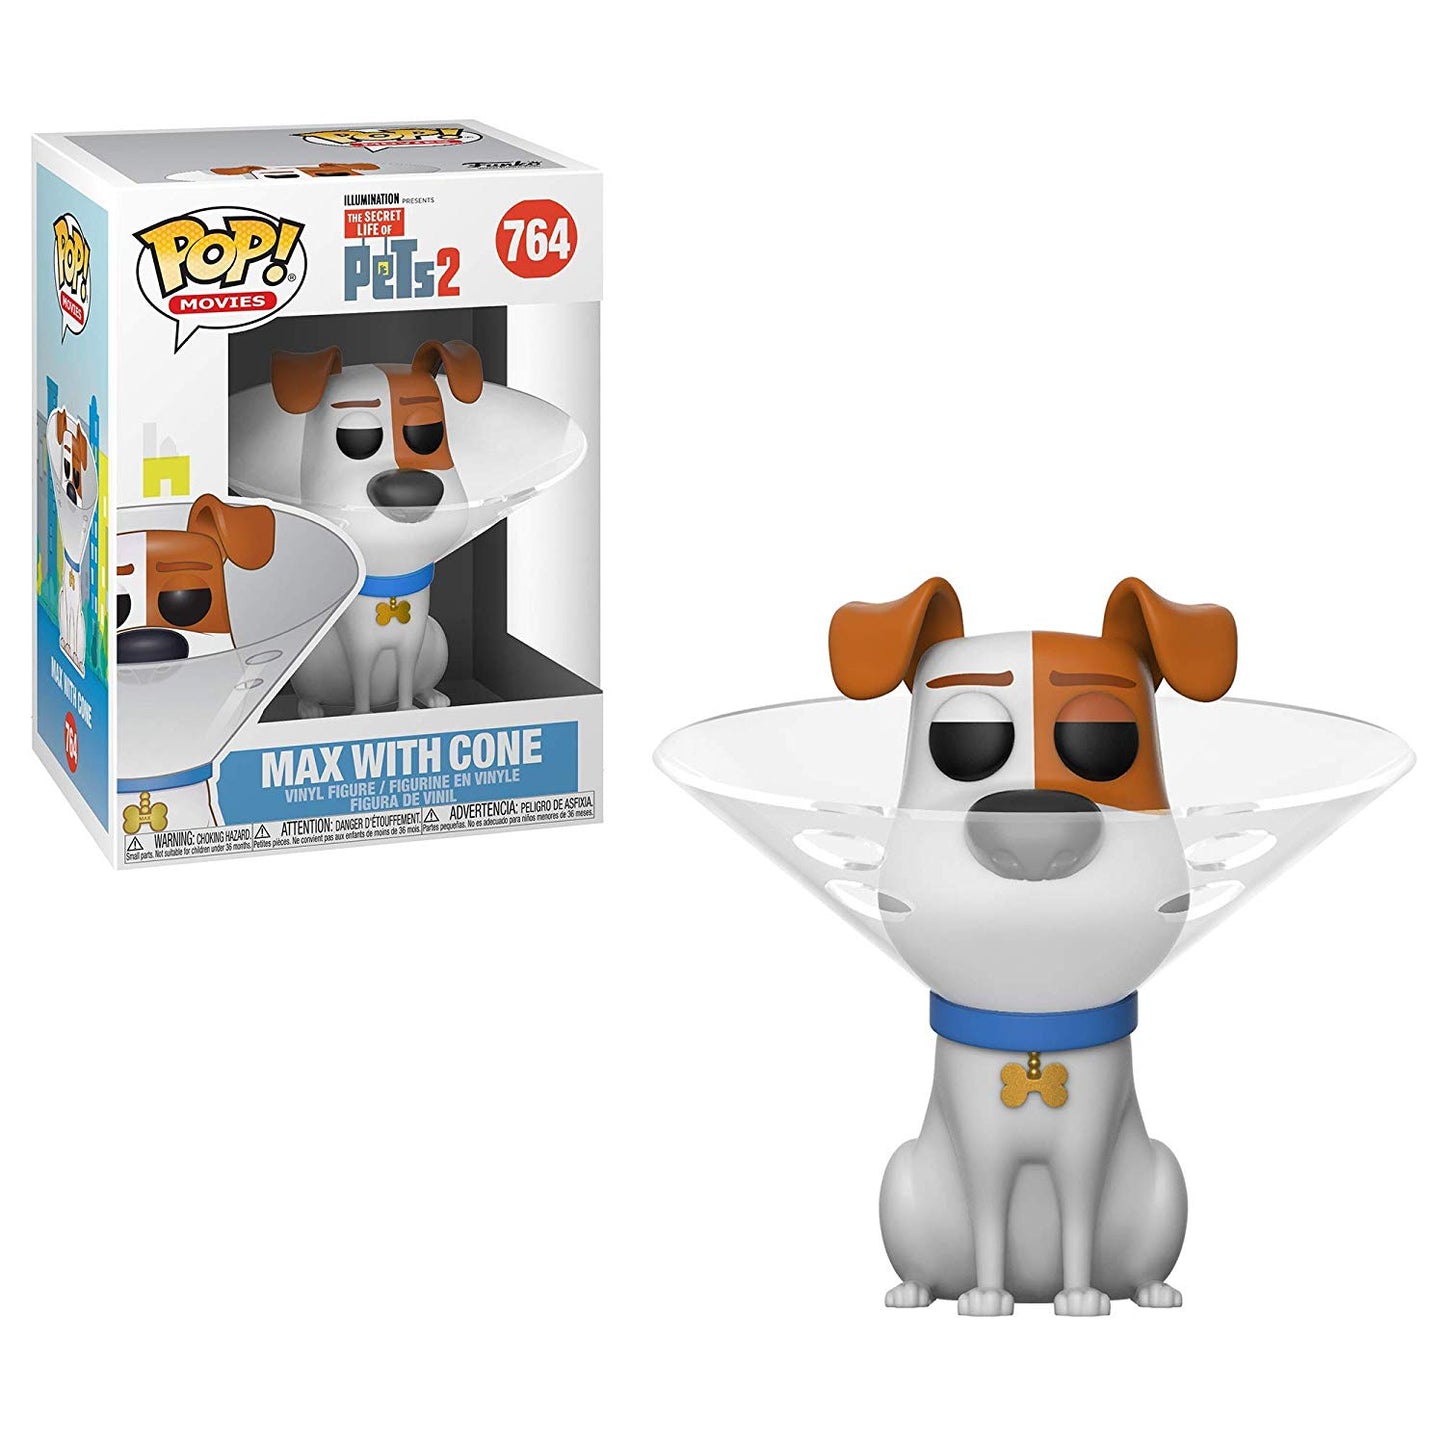 Pop! Movies The Secret Life of Pets 2 Vinyl Figure Max with Cone #764